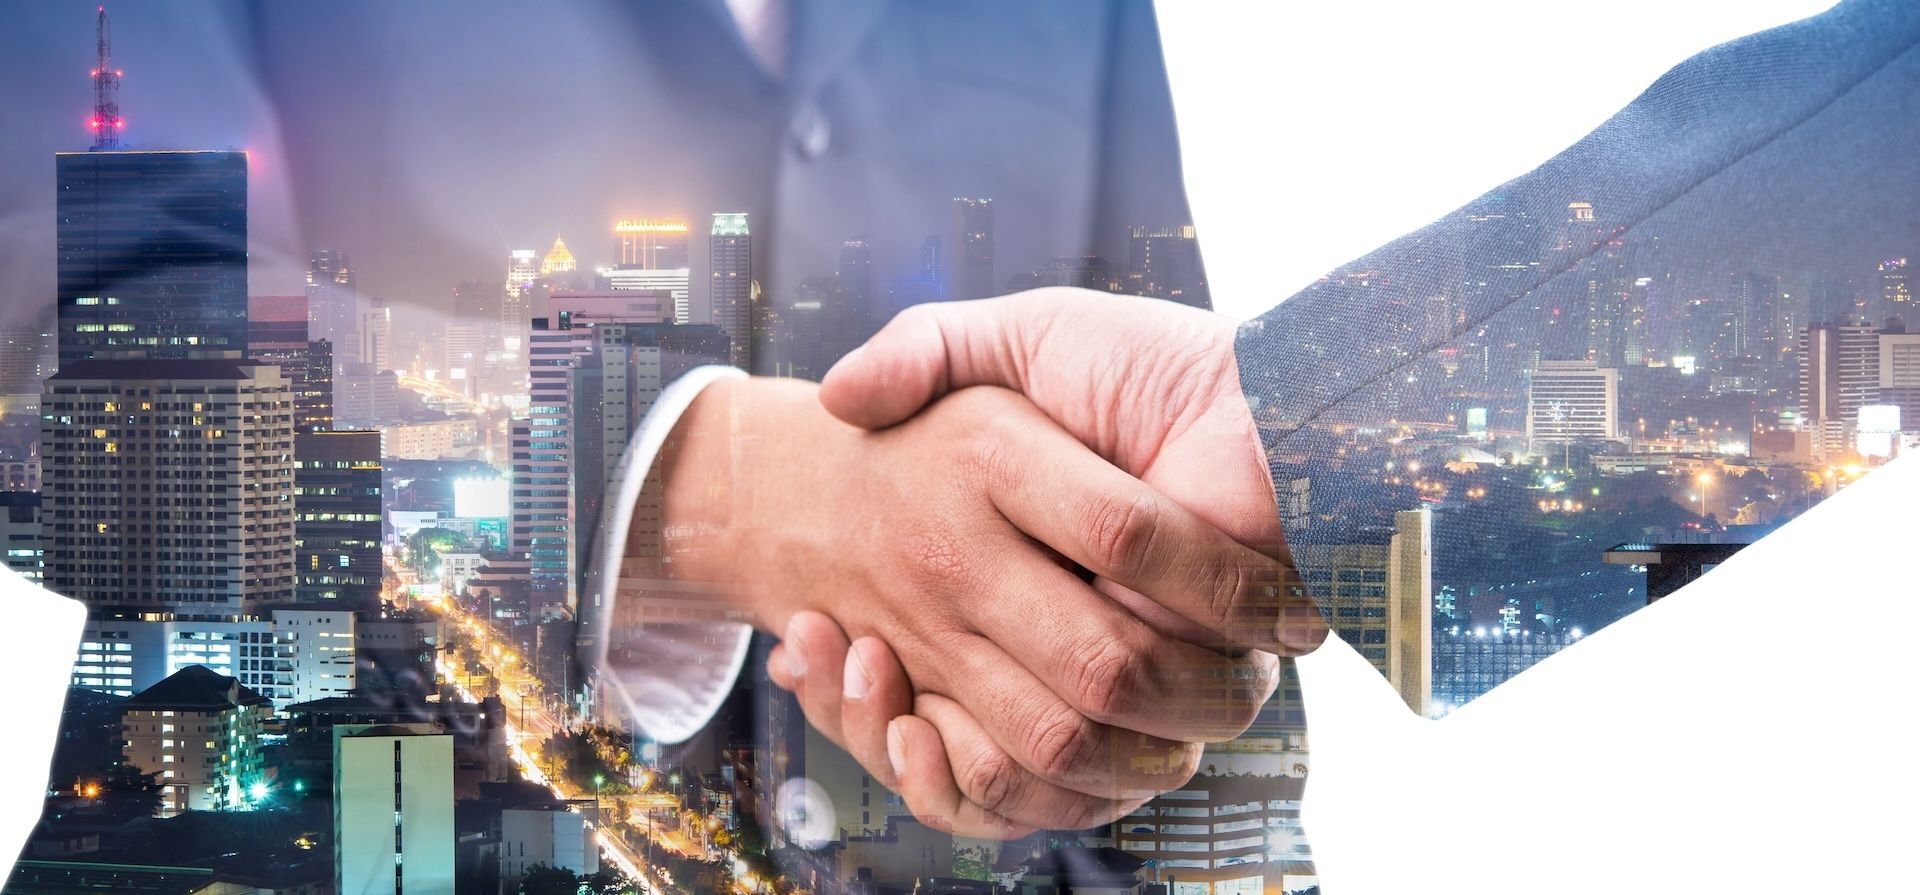 Two businessmen are shaking hands in front of a city skyline.